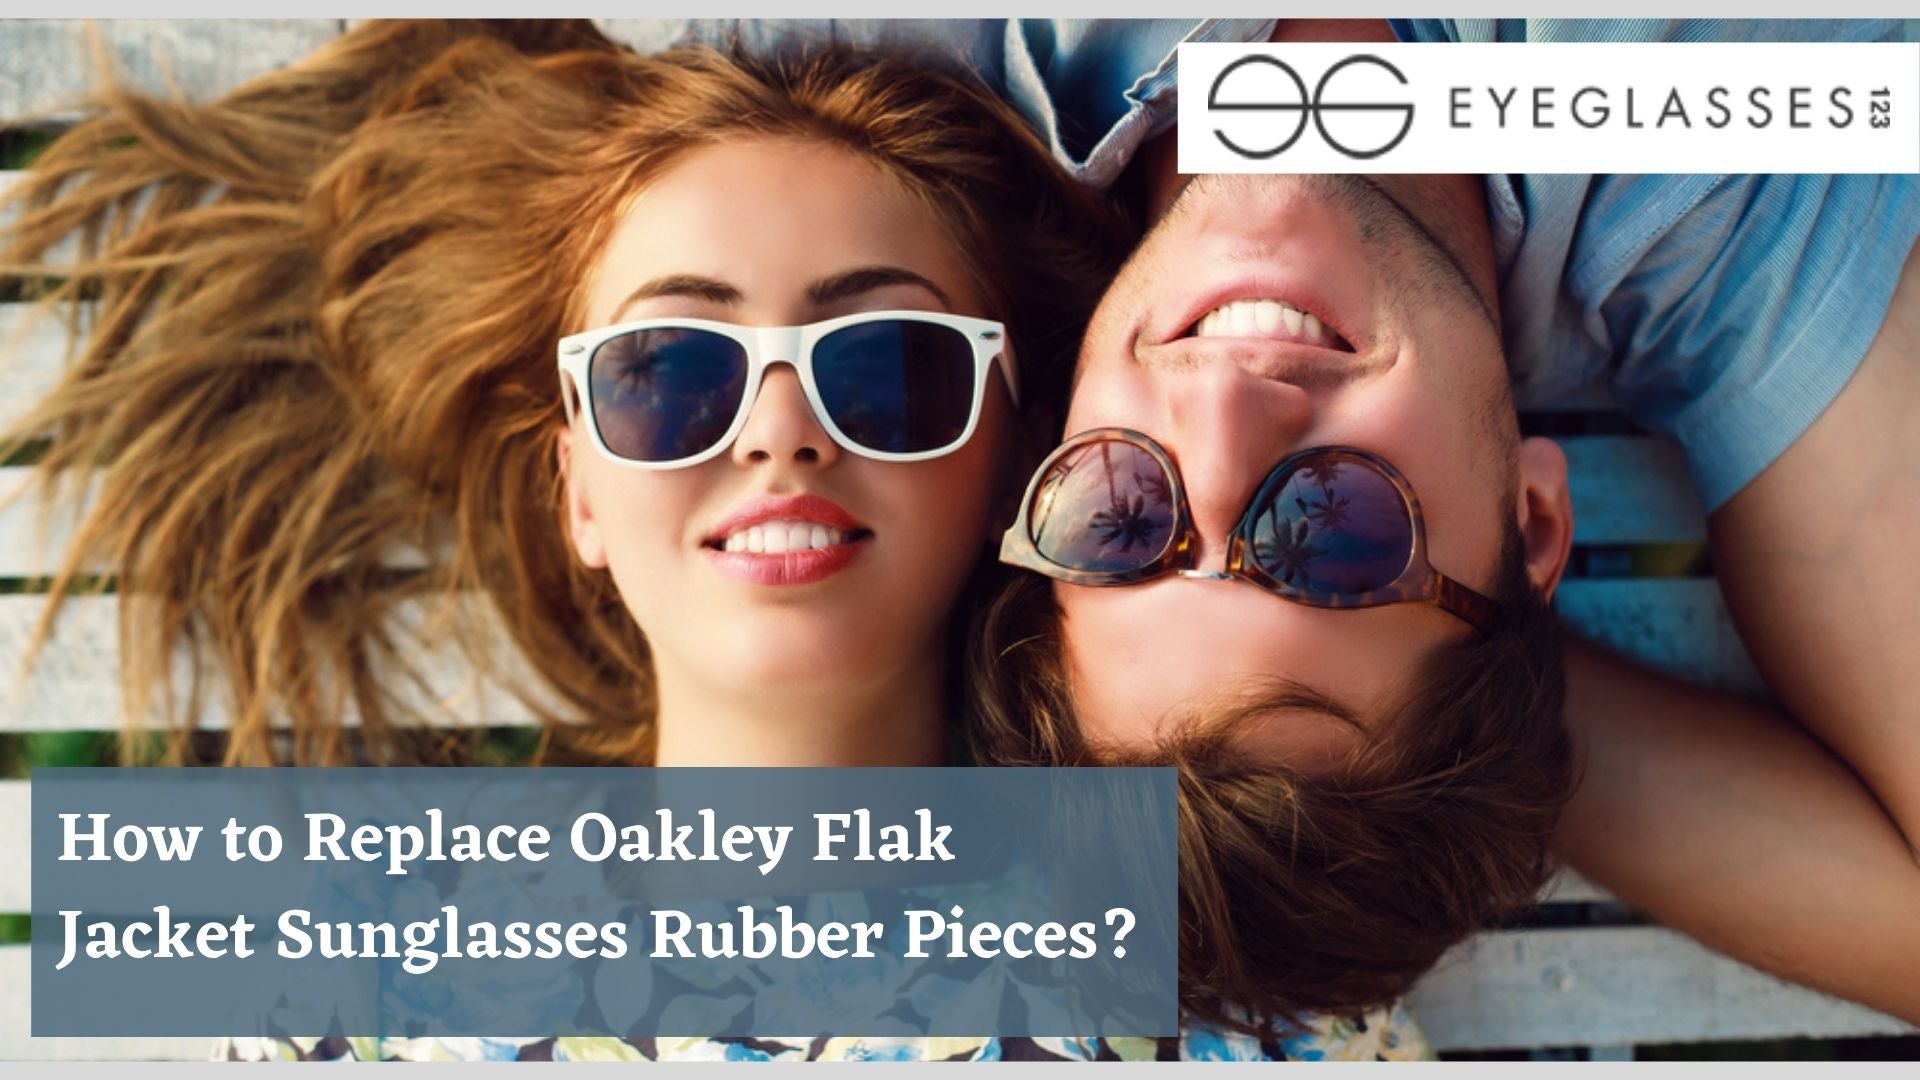 How to Replace Oakley Flak Jacket Sunglasses Rubber Pieces?